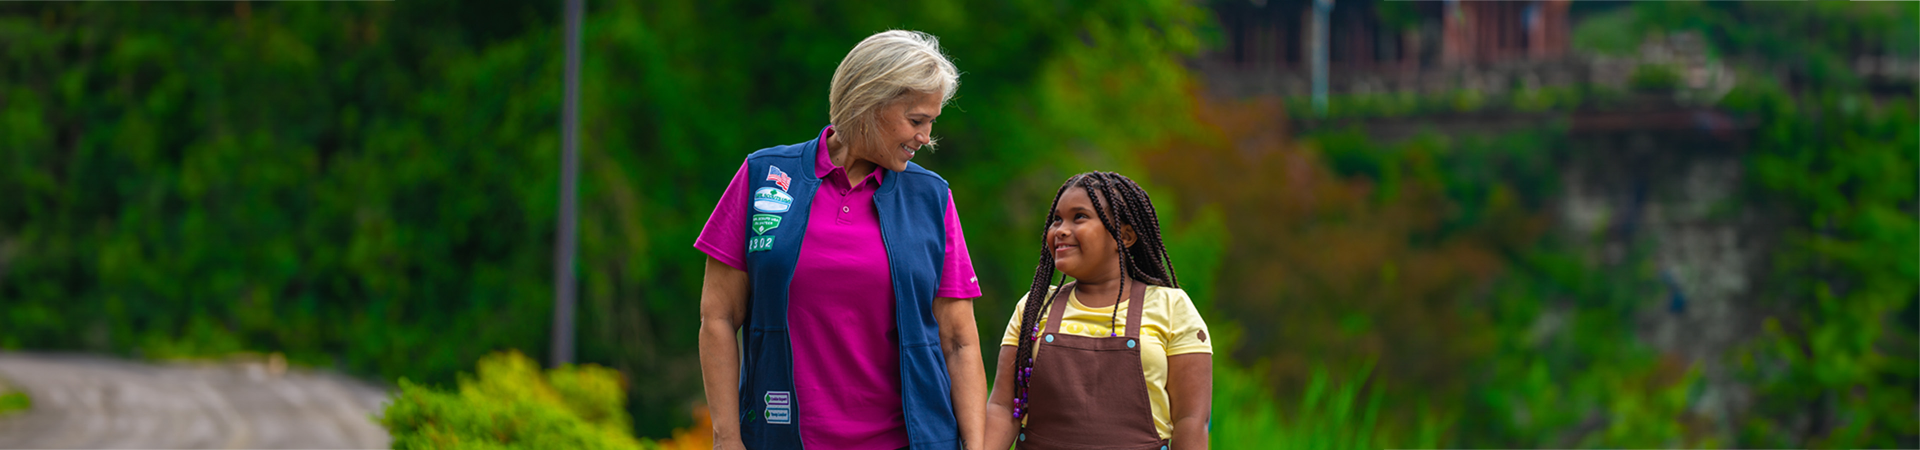  adult woman girl scout volunteer with a junior Girl Scout wearing a vest outdoors  